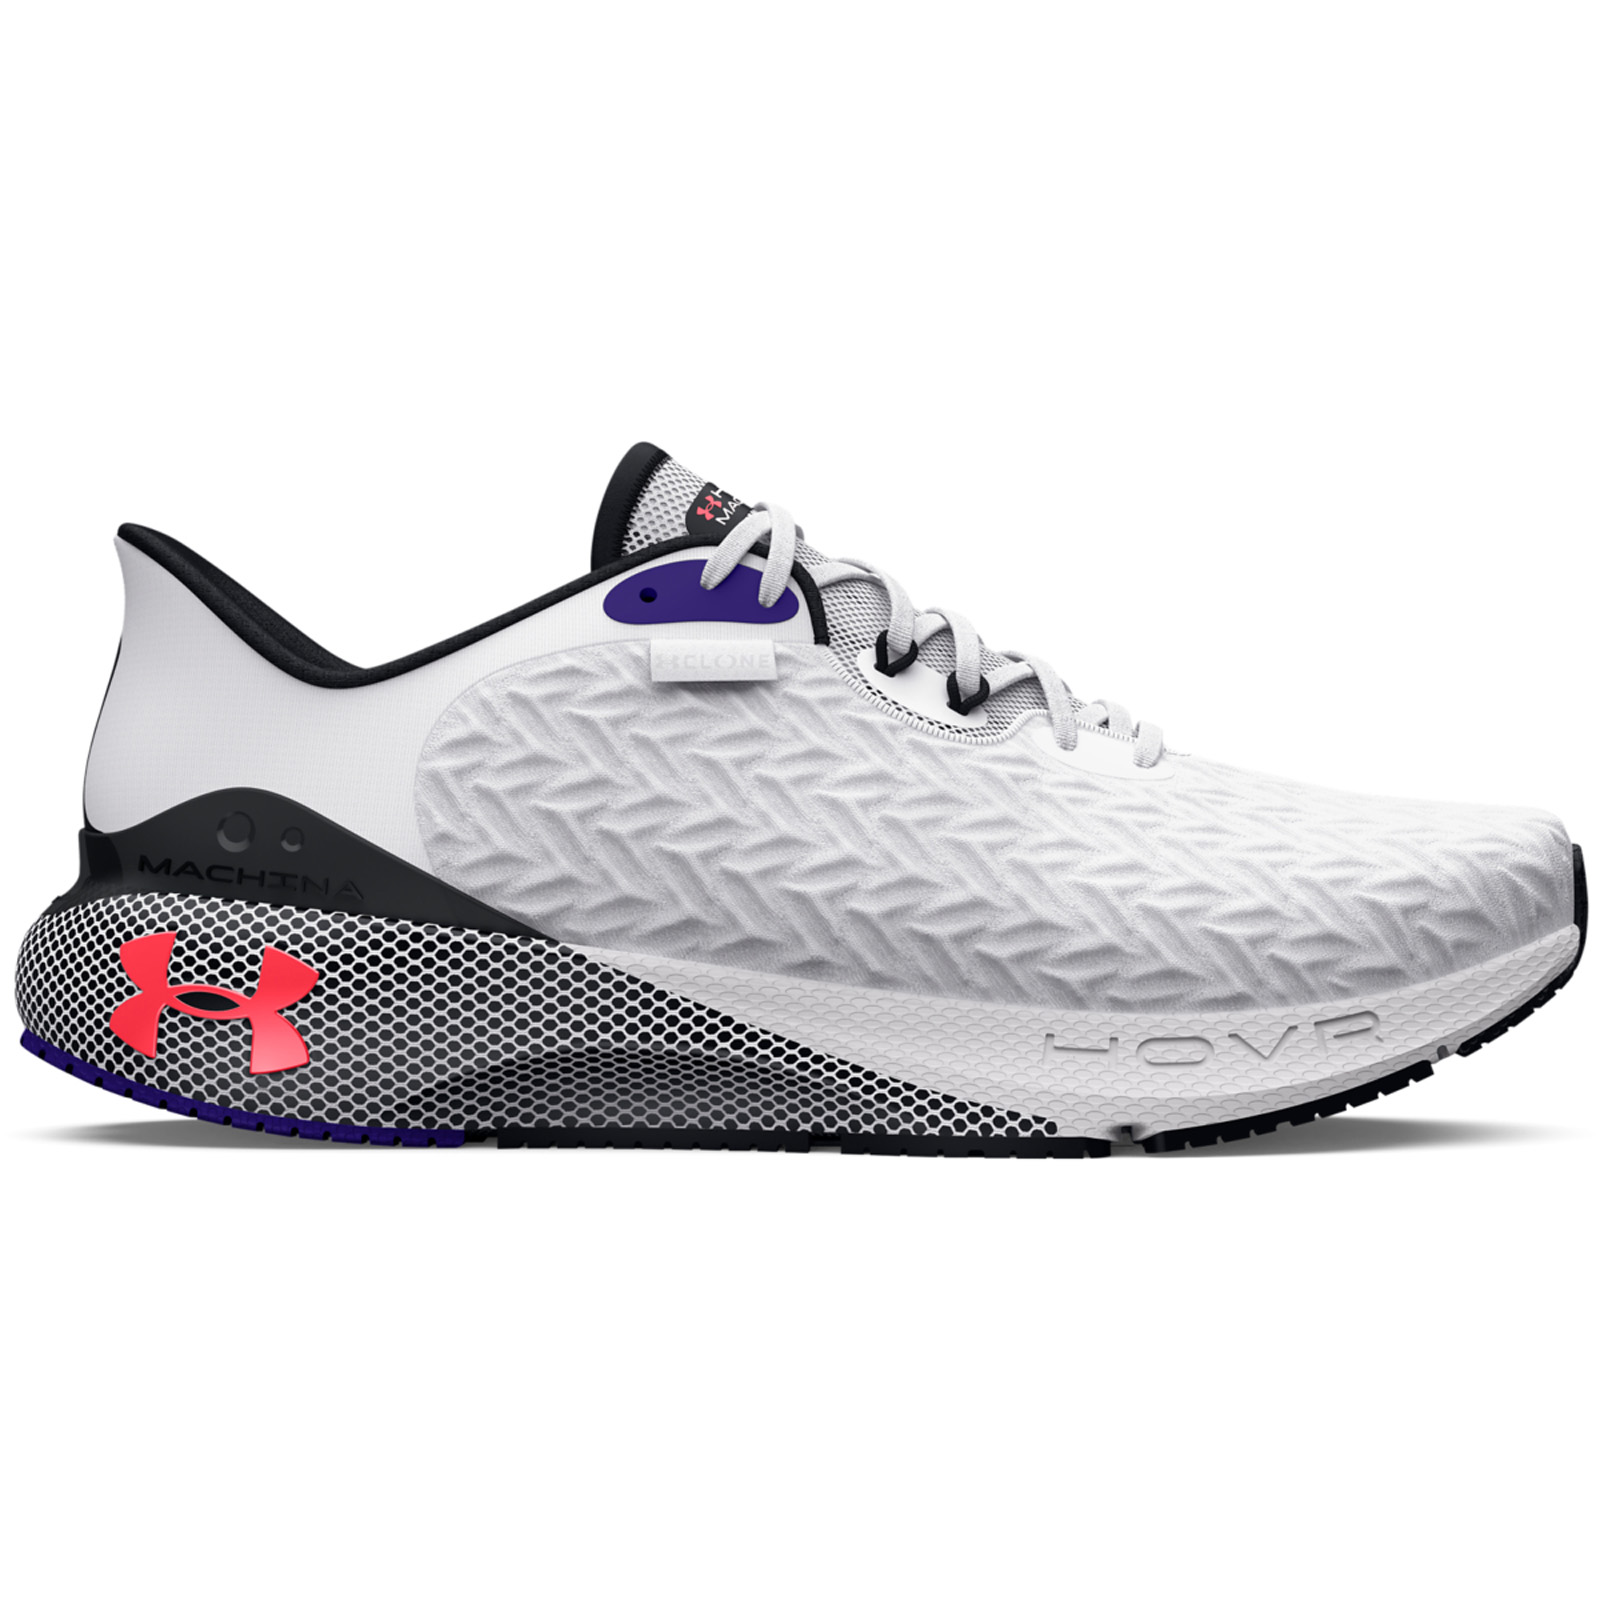 Under Armour - Men's UA HOVR™ Machina 3 Clone Running Shoes - White/Black/Beta Ανδρικά > Παπούτσια > Αθλητικά > Παπούτσι Low Cut